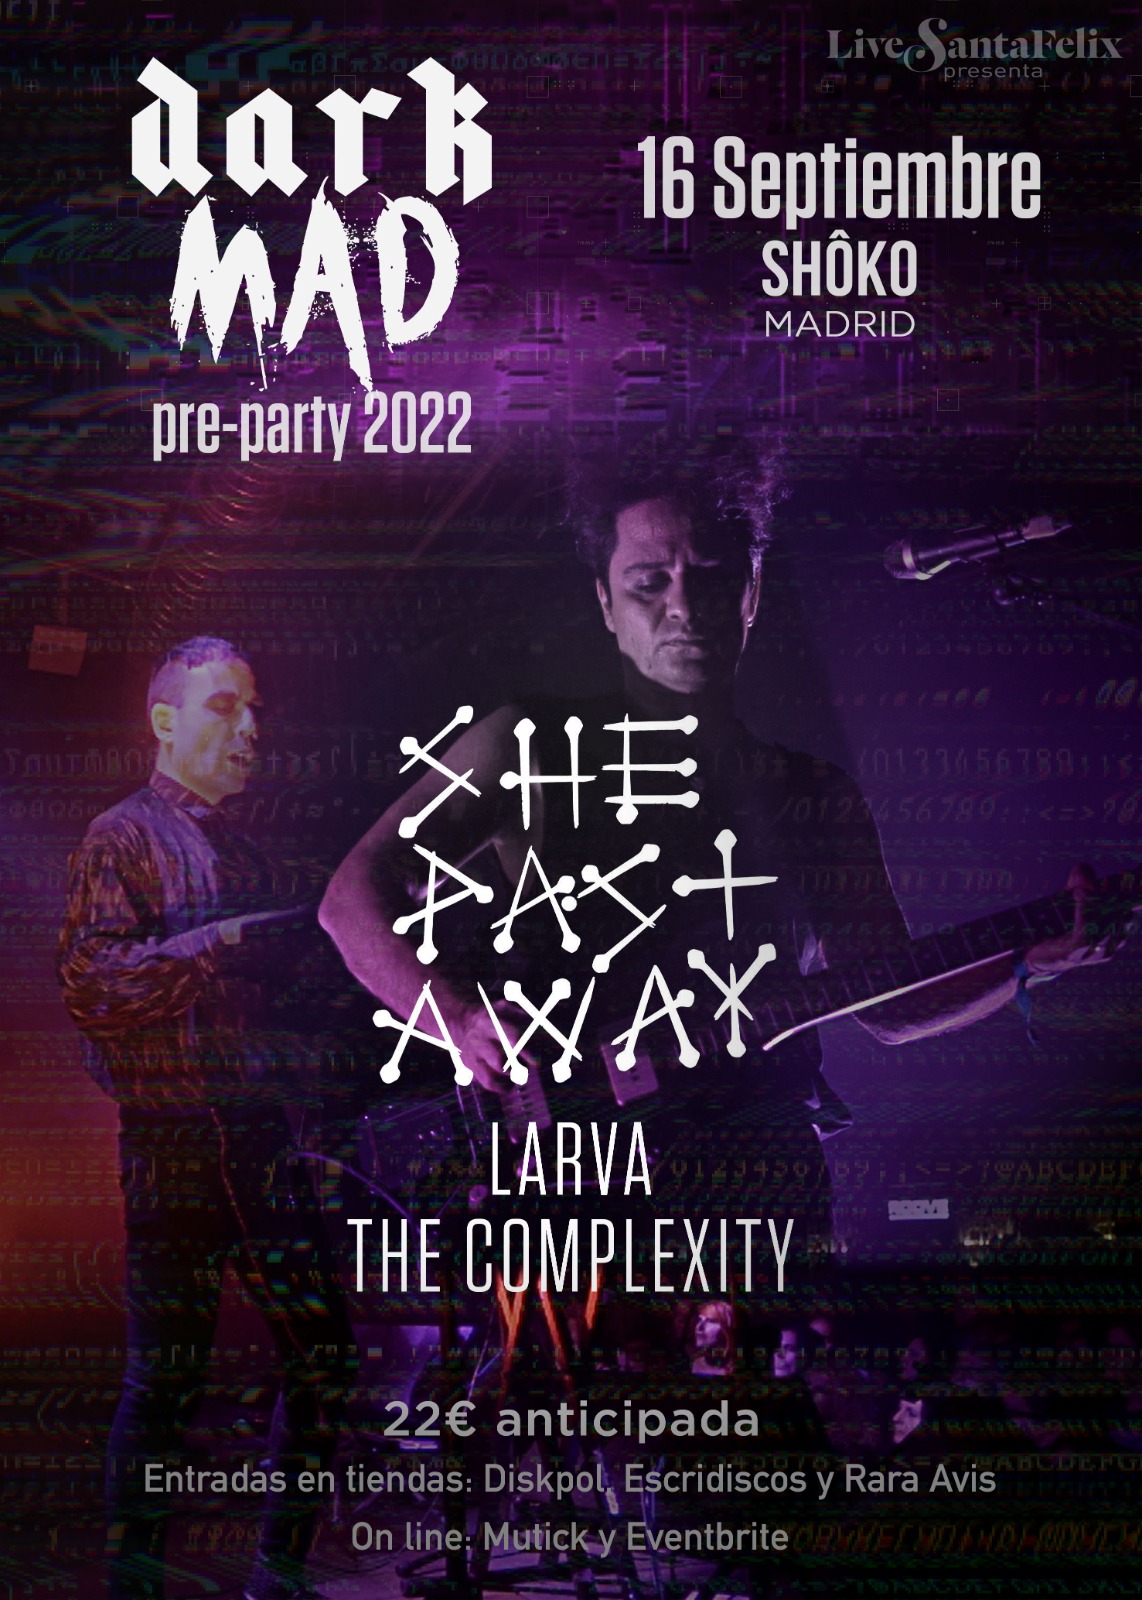 SHE PAST AWAY + LARVA + The COMPLEXITY en Madrid   - Mutick